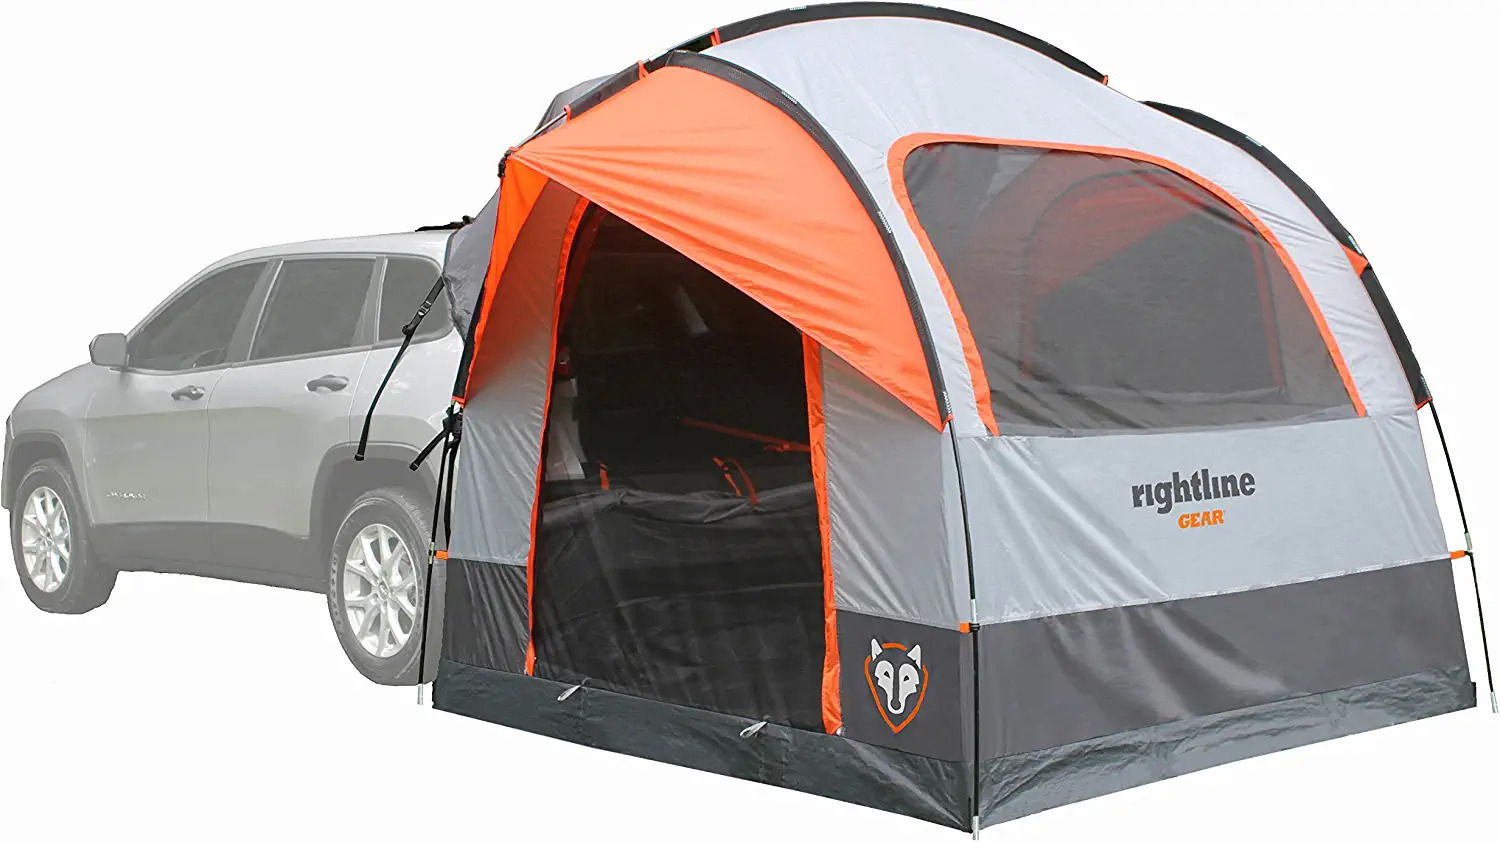 Rightline Gear SUV Tent $102 + Free Shipping